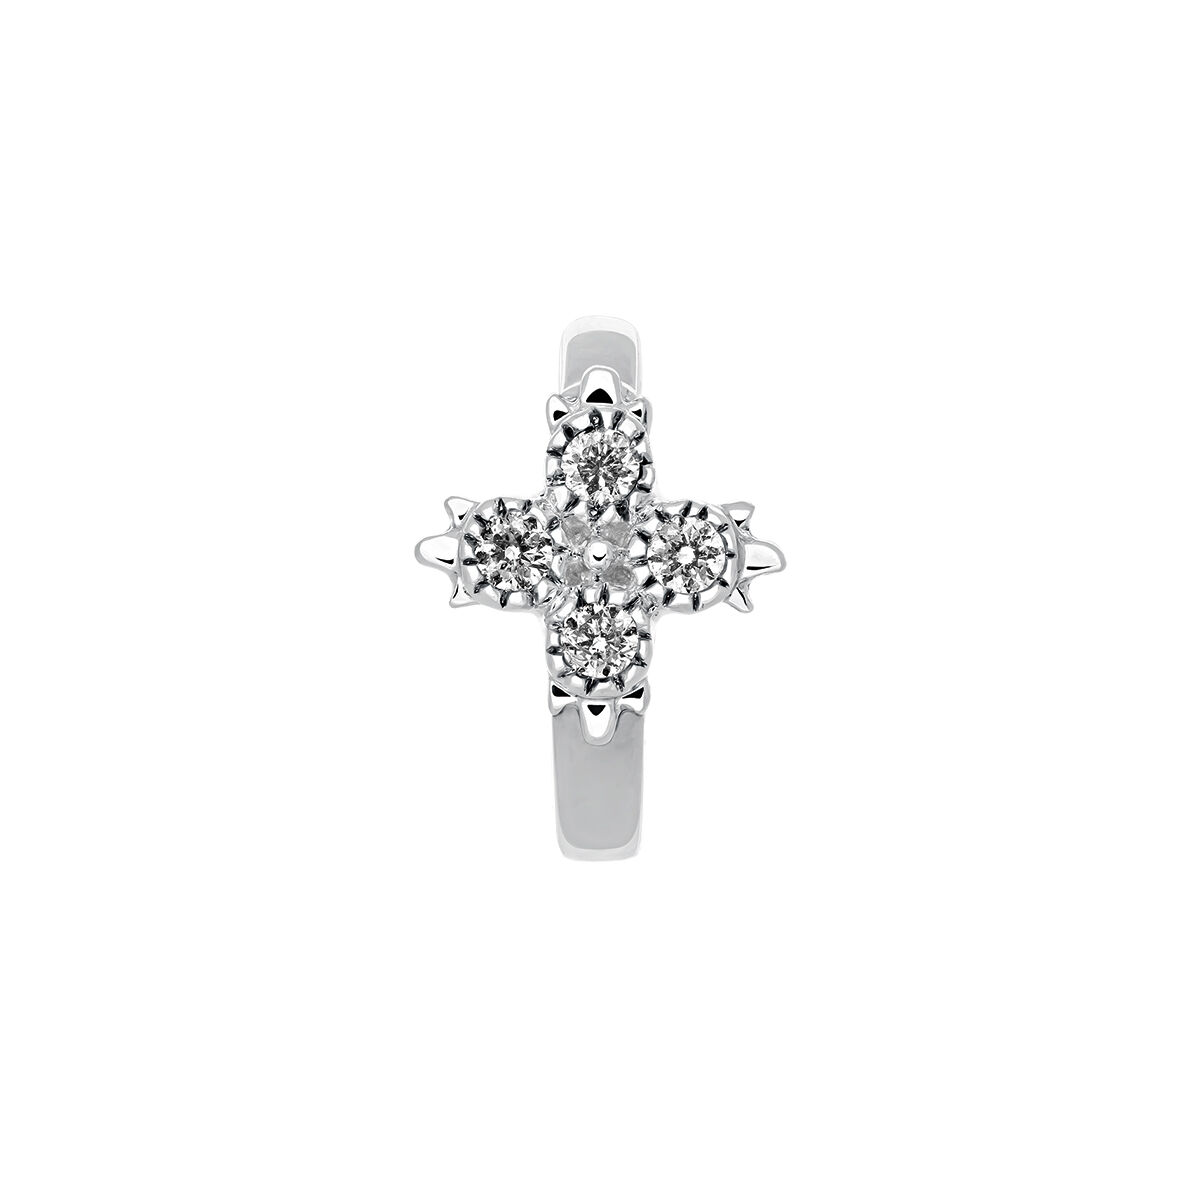 Single small hoop earring in 9k white gold with a diamond cross, J03386-01-H, hi-res